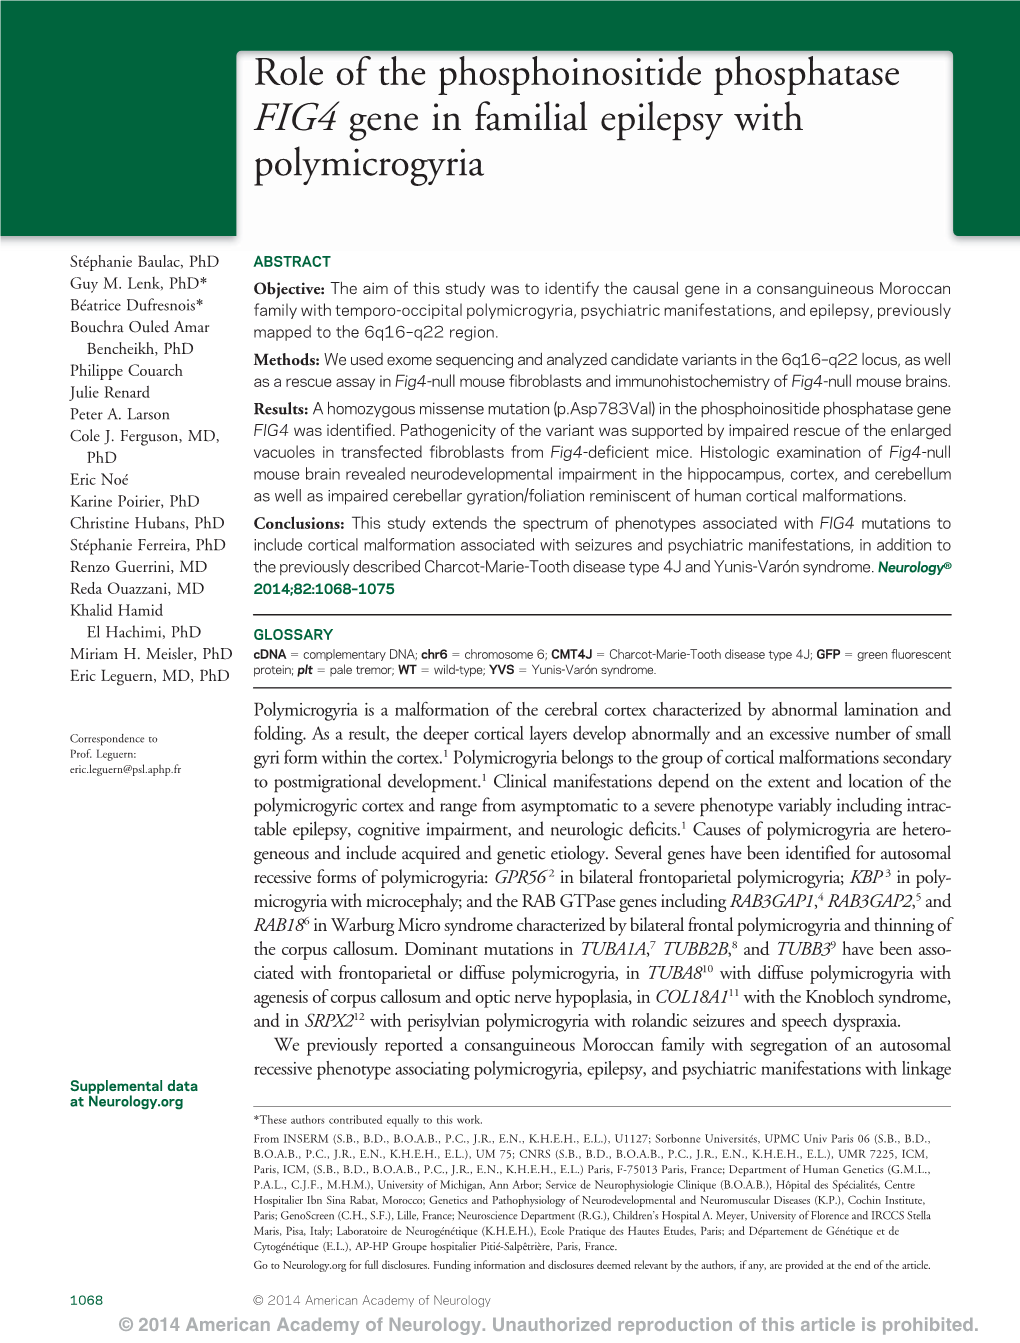 Role of the Phosphoinositide Phosphatase FIG4 Gene in Familial Epilepsy with Polymicrogyria